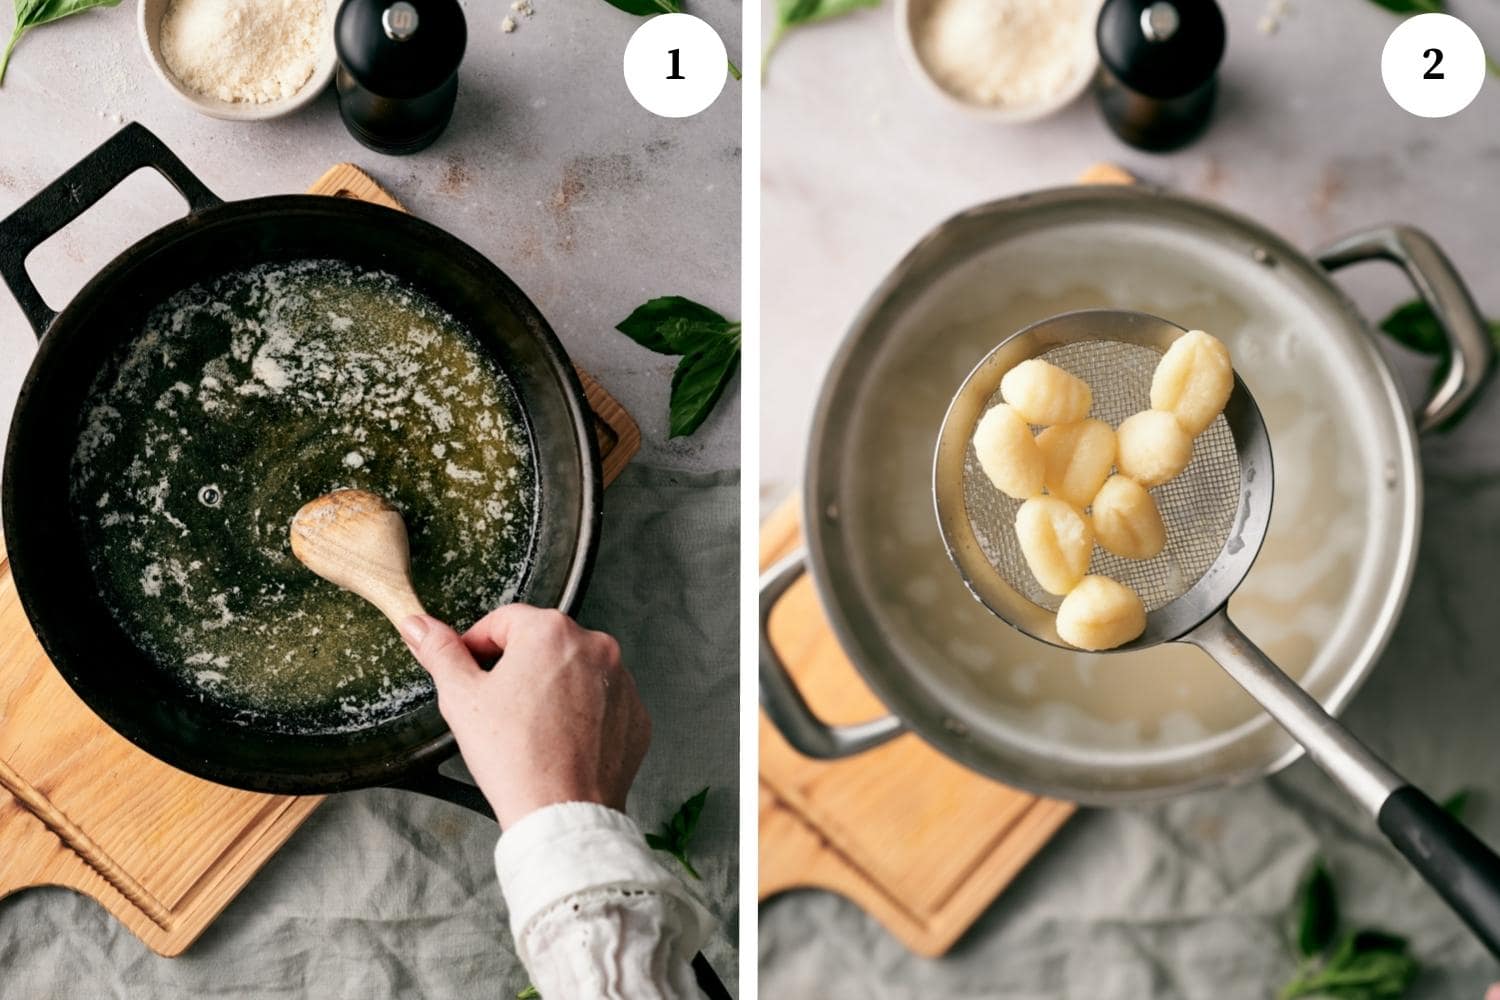 pan-fried gnocchi procedure: melted butter on a skillet, gnocchi put out from boiling water